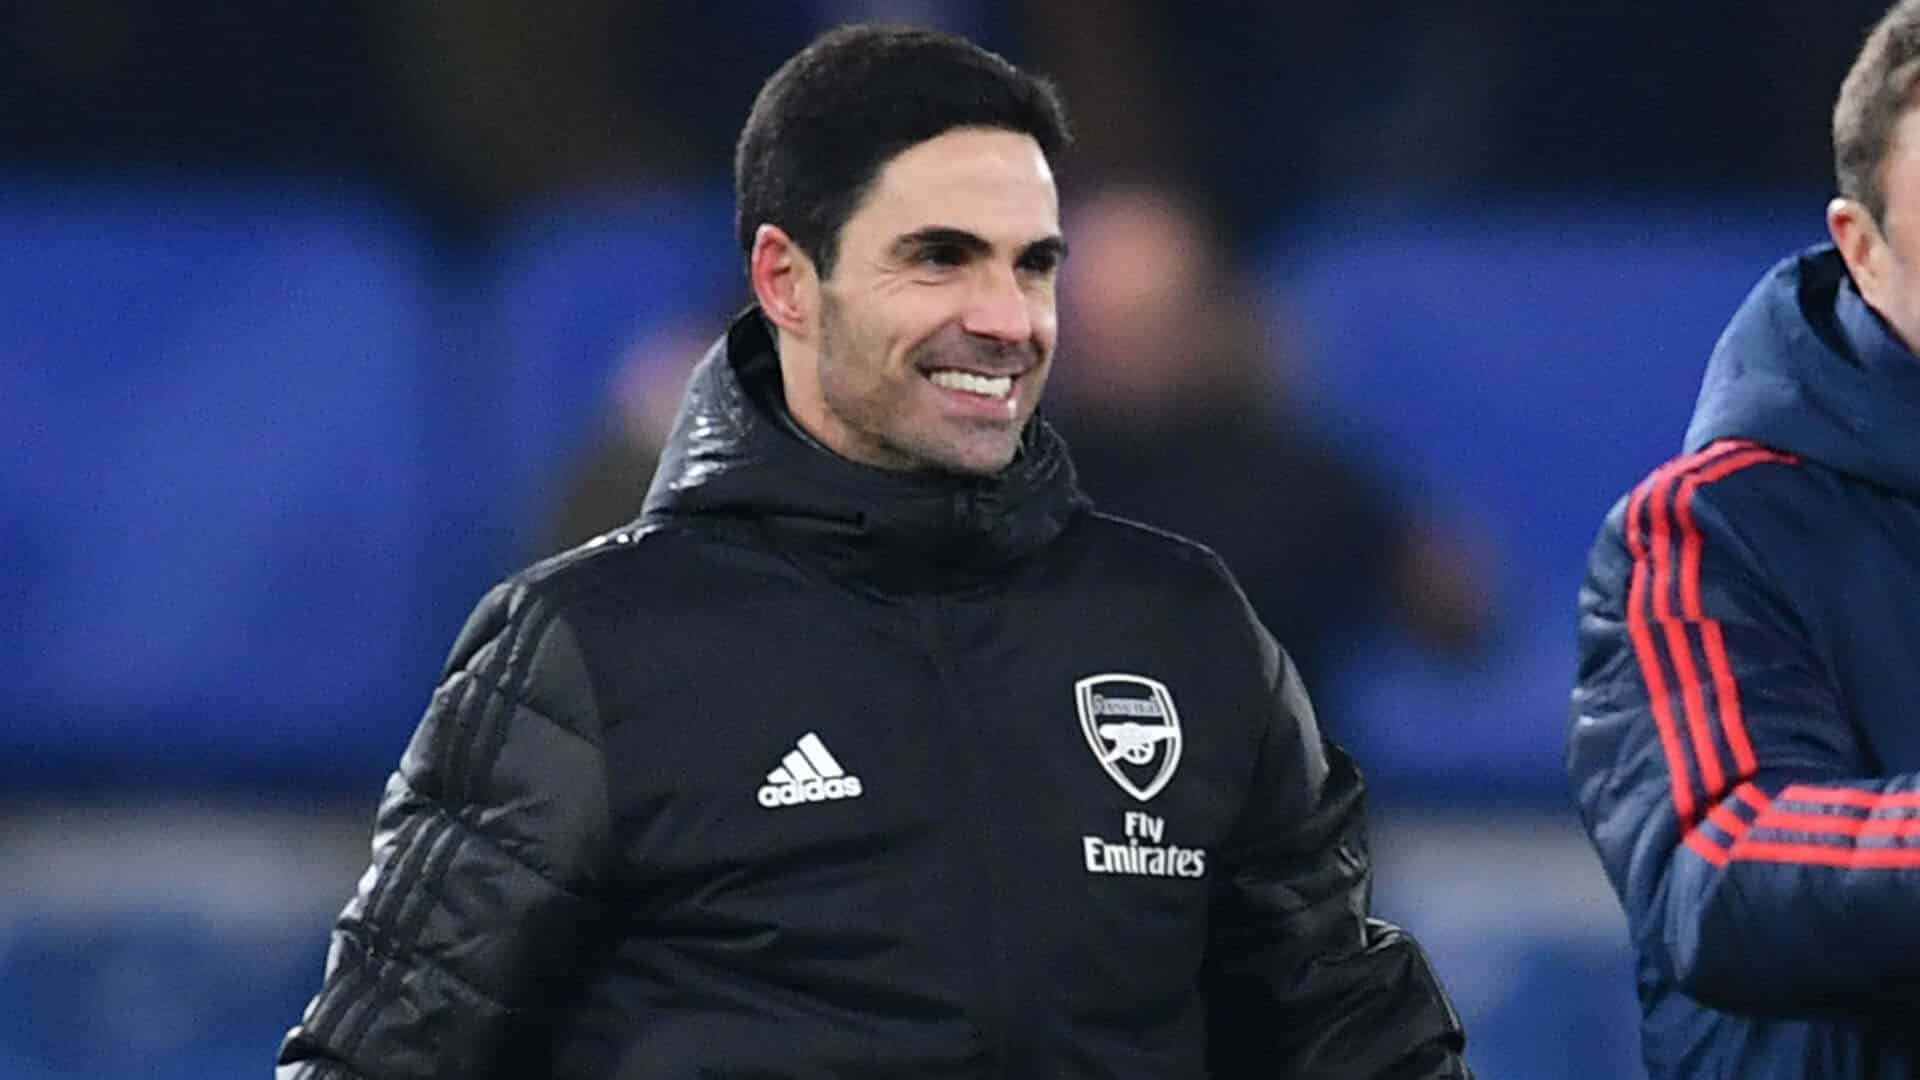 Arsenal is in a really good place to win Premier League - Arteta